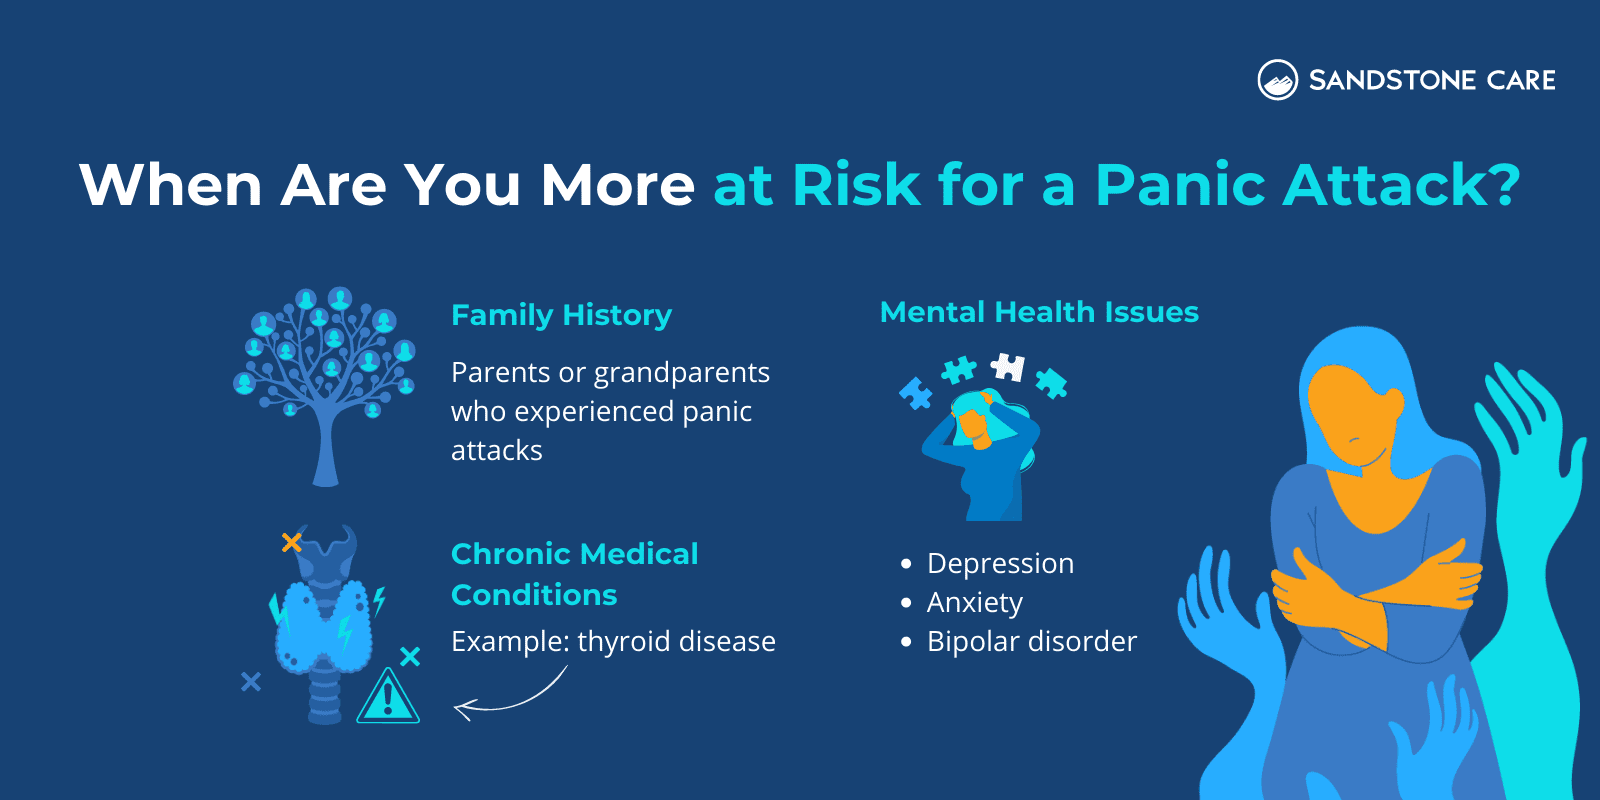 "When Are You More At Risk For a Panic Attack?" Demonstrated with 3 different category with relevant graphics